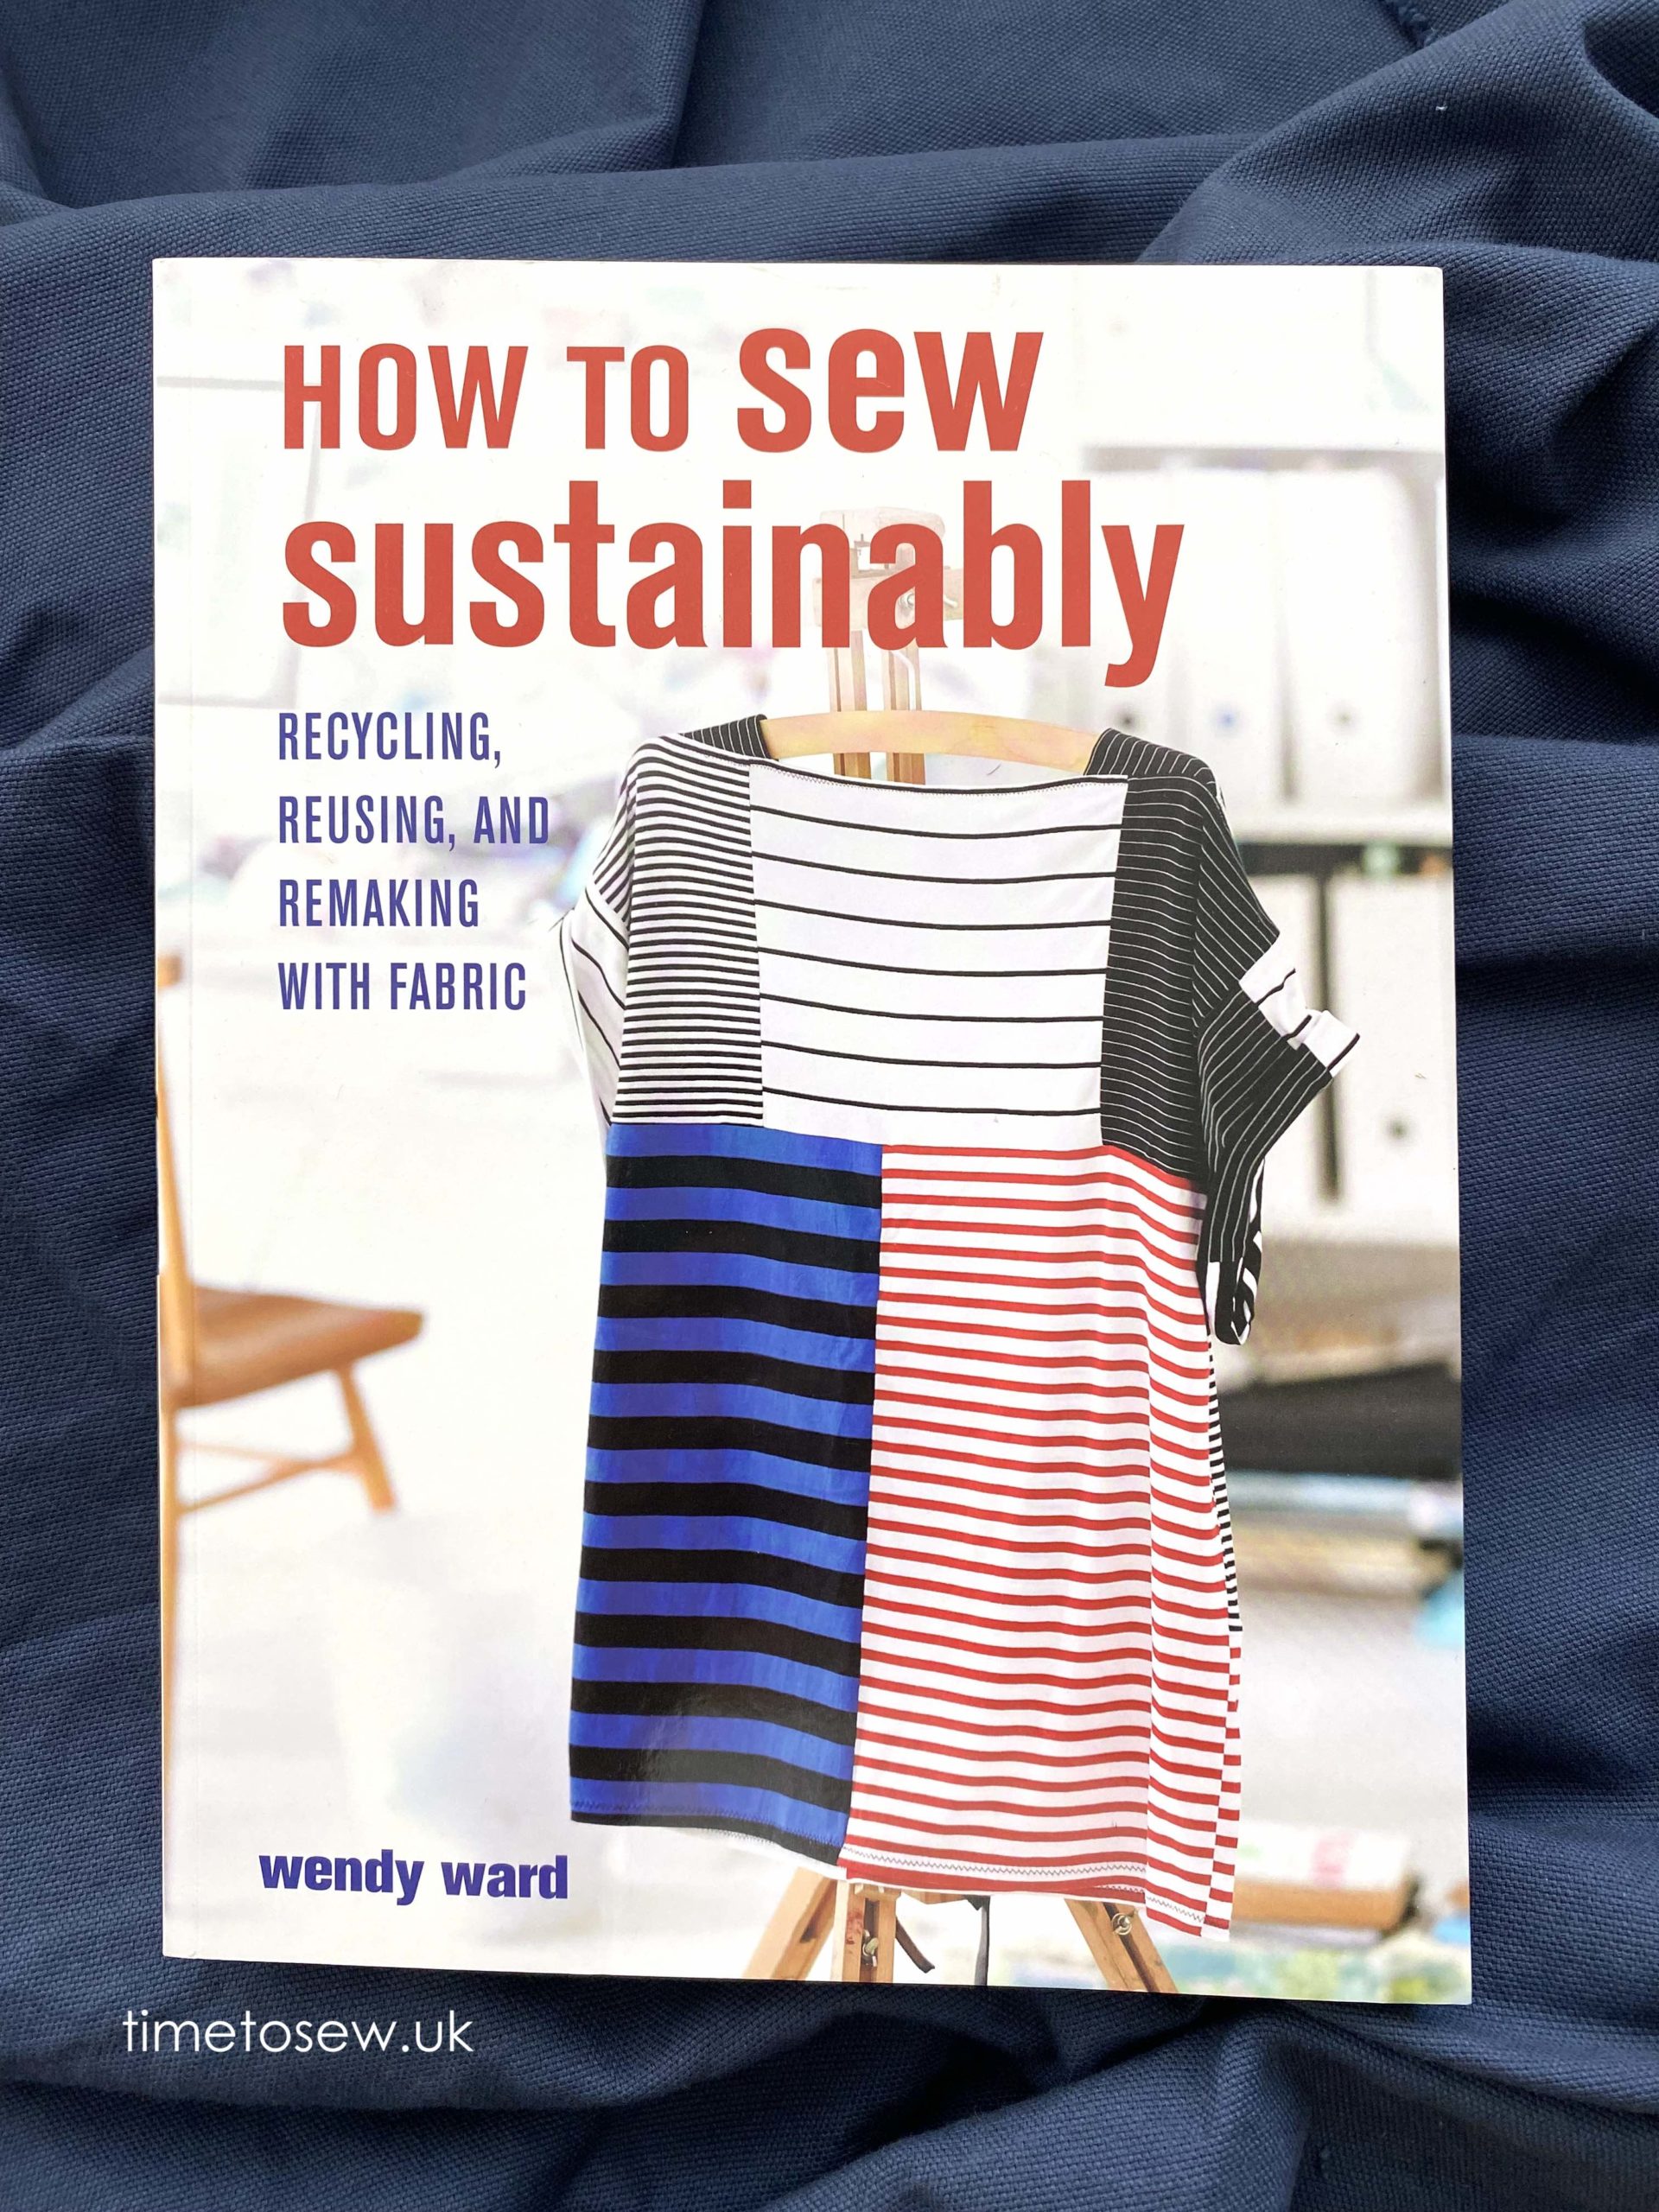 Book Review: How to sew sustainably by Wendy Ward - Time to Sew